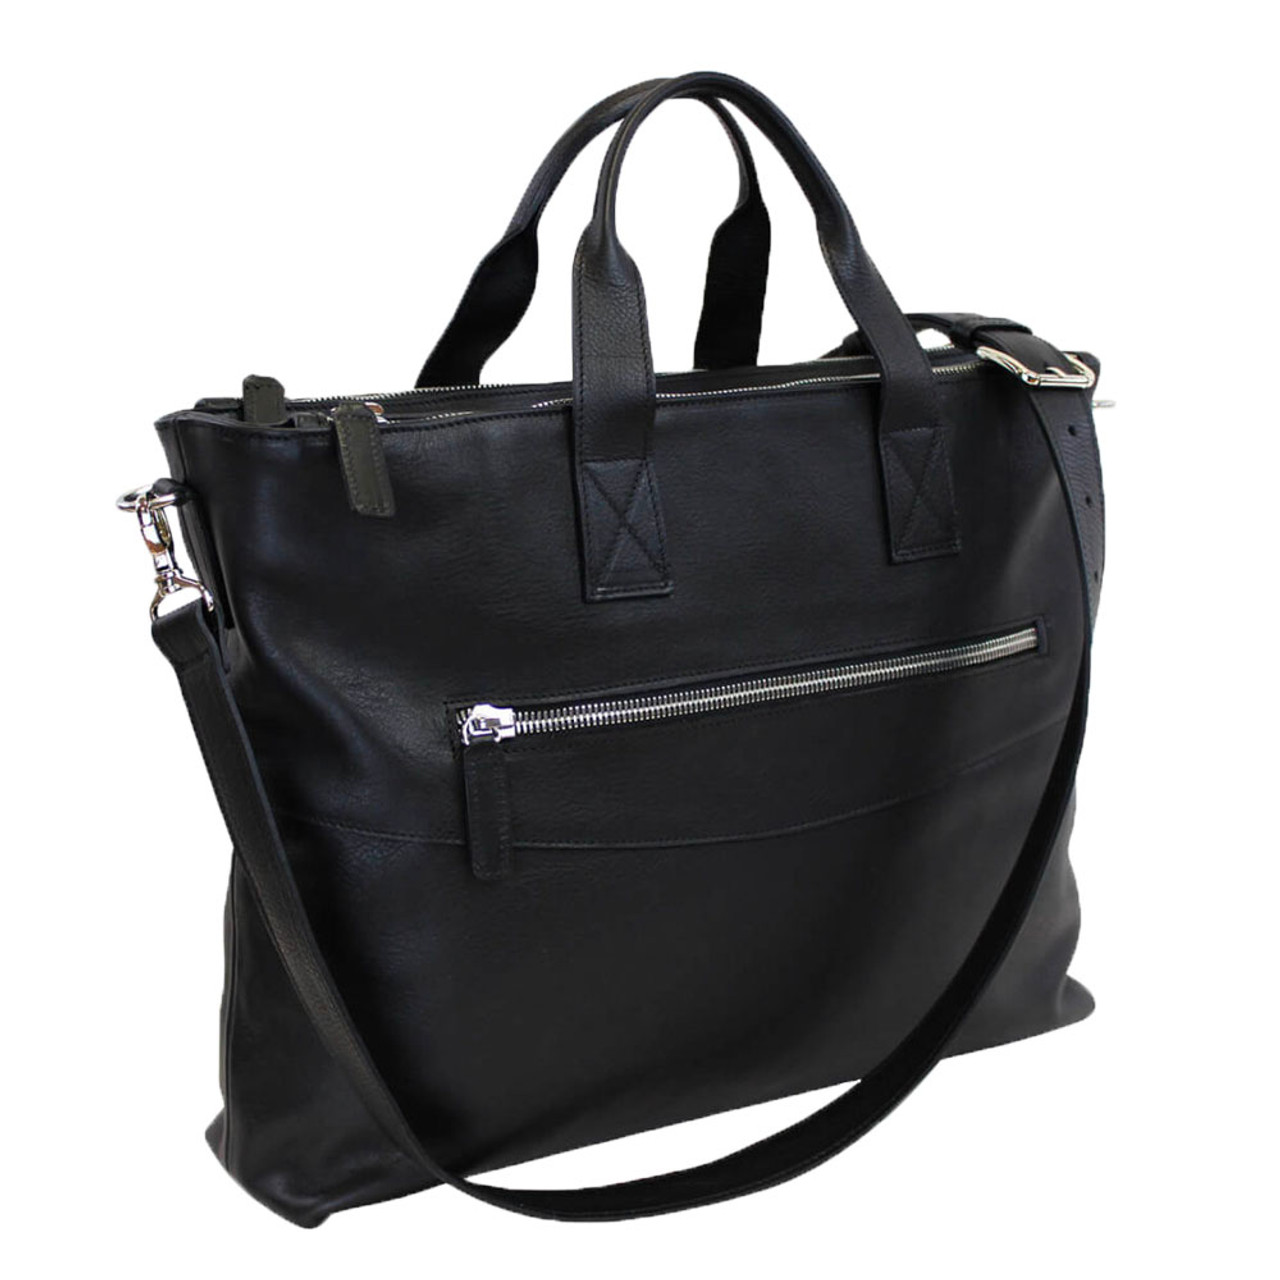 San Marco Bag Terrida - Made in Italy, vegetable tanned leather